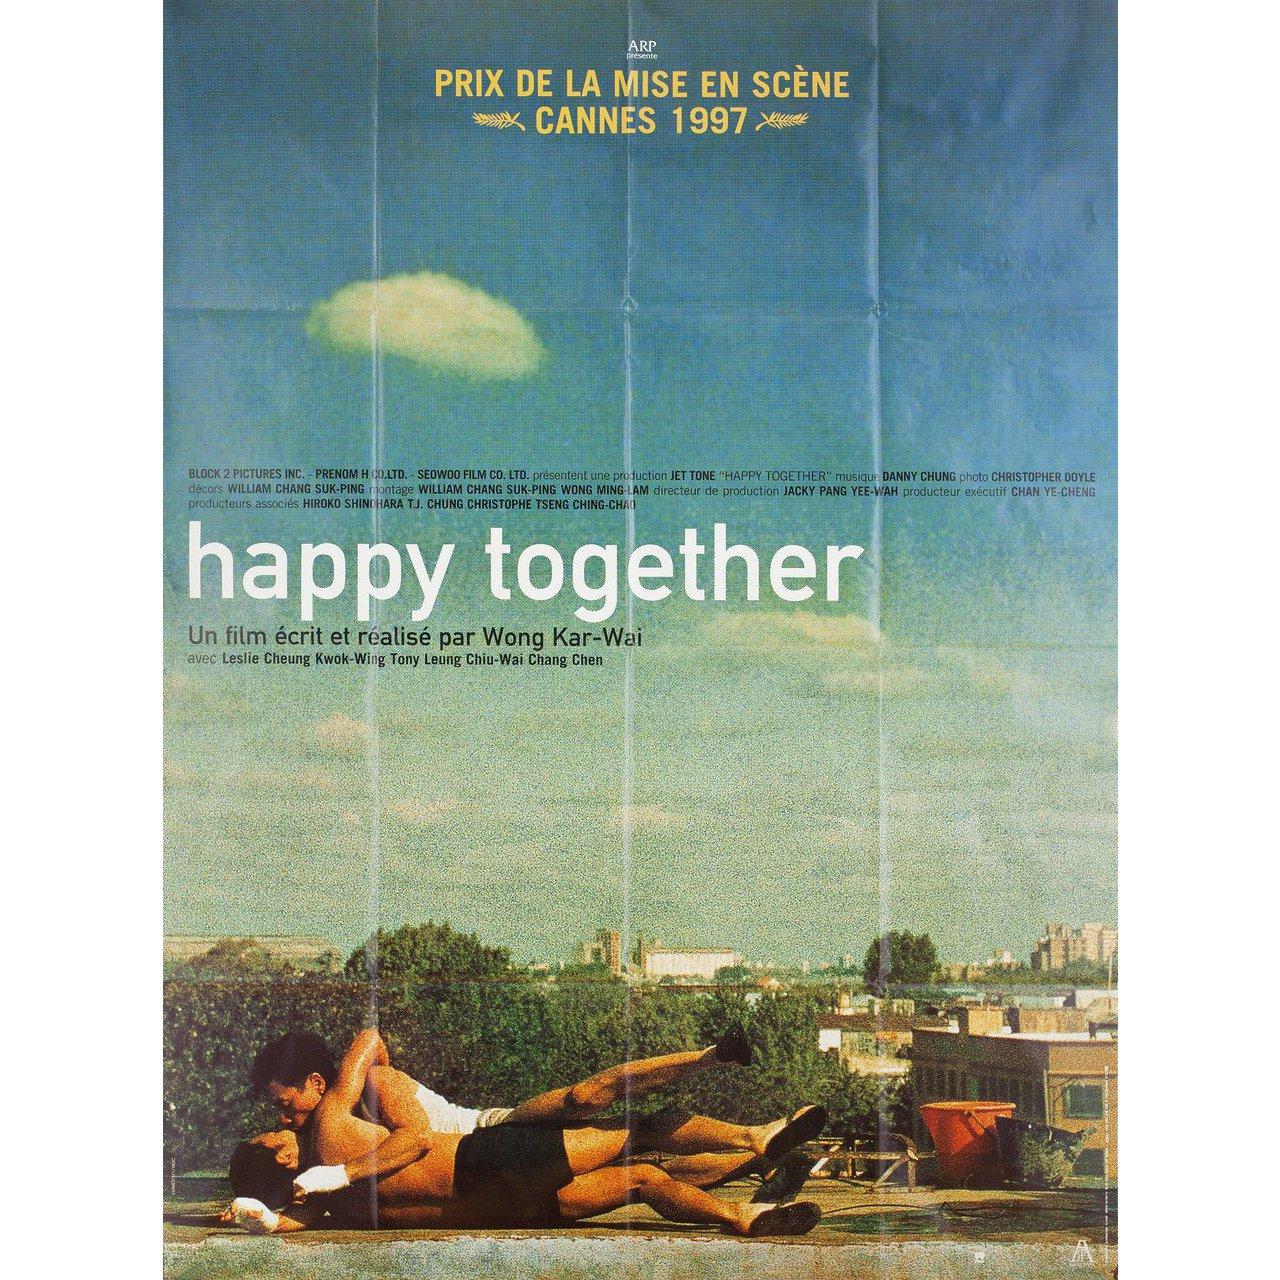 Original 1997 French grande poster for the film Happy Together (Chun gwong cha sit) directed by Kar Wai Wong with Leslie Cheung / Tony Chiu Wai Leung / Chen Chang / Gregory Dayton. Fine condition, folded. Many original posters were issued folded or